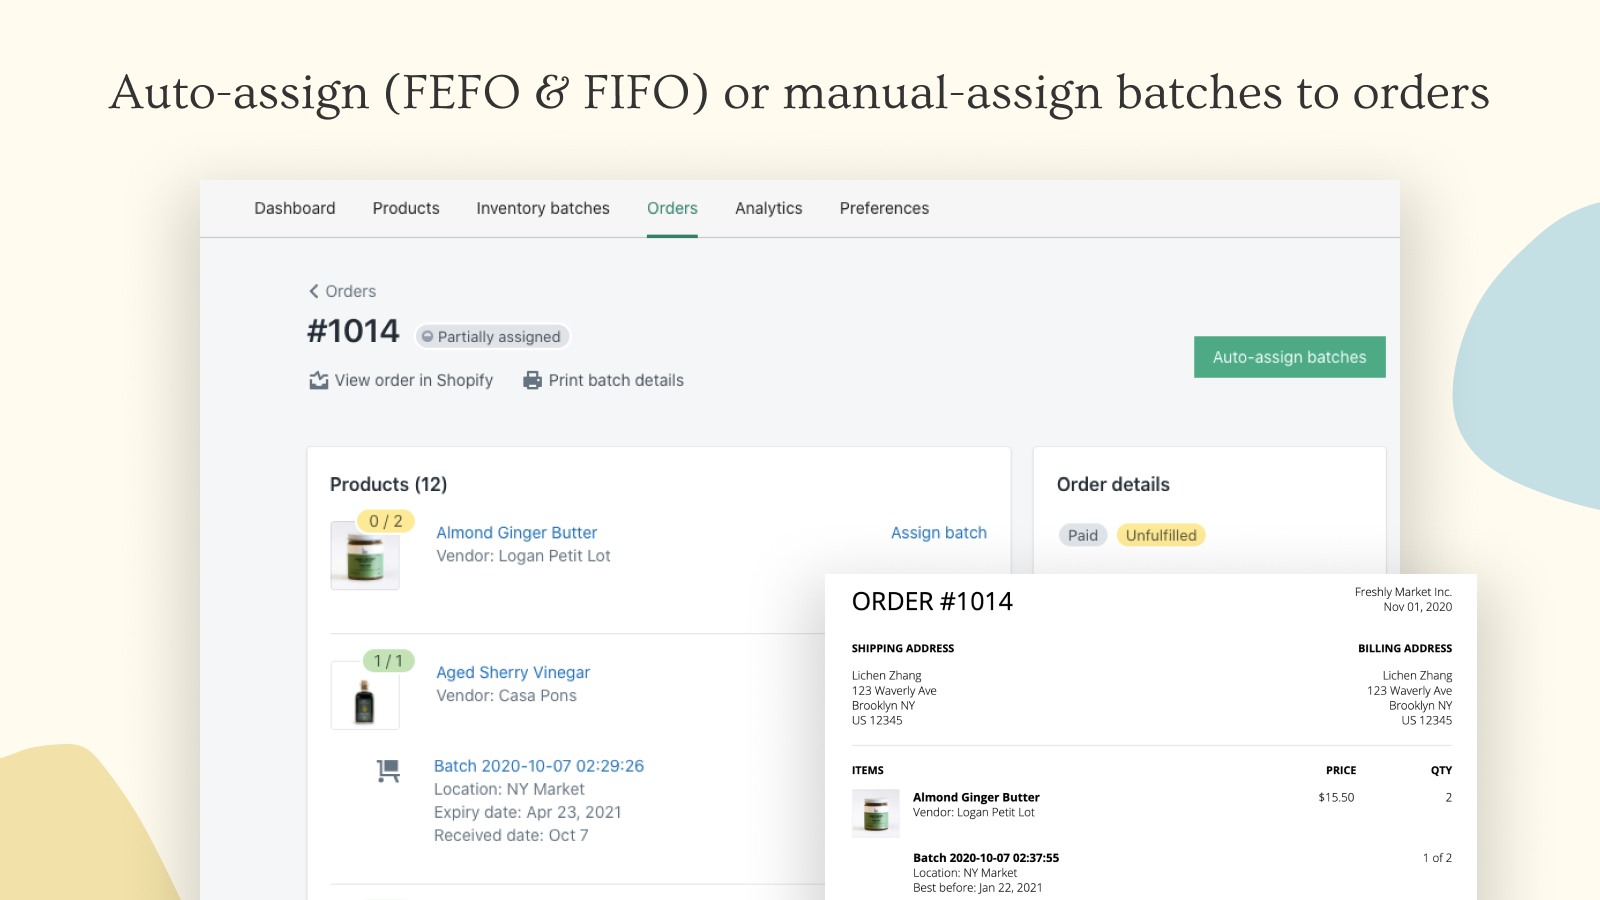 Auto-assign (FEFO & FIFO) or manual-assign batches to orders